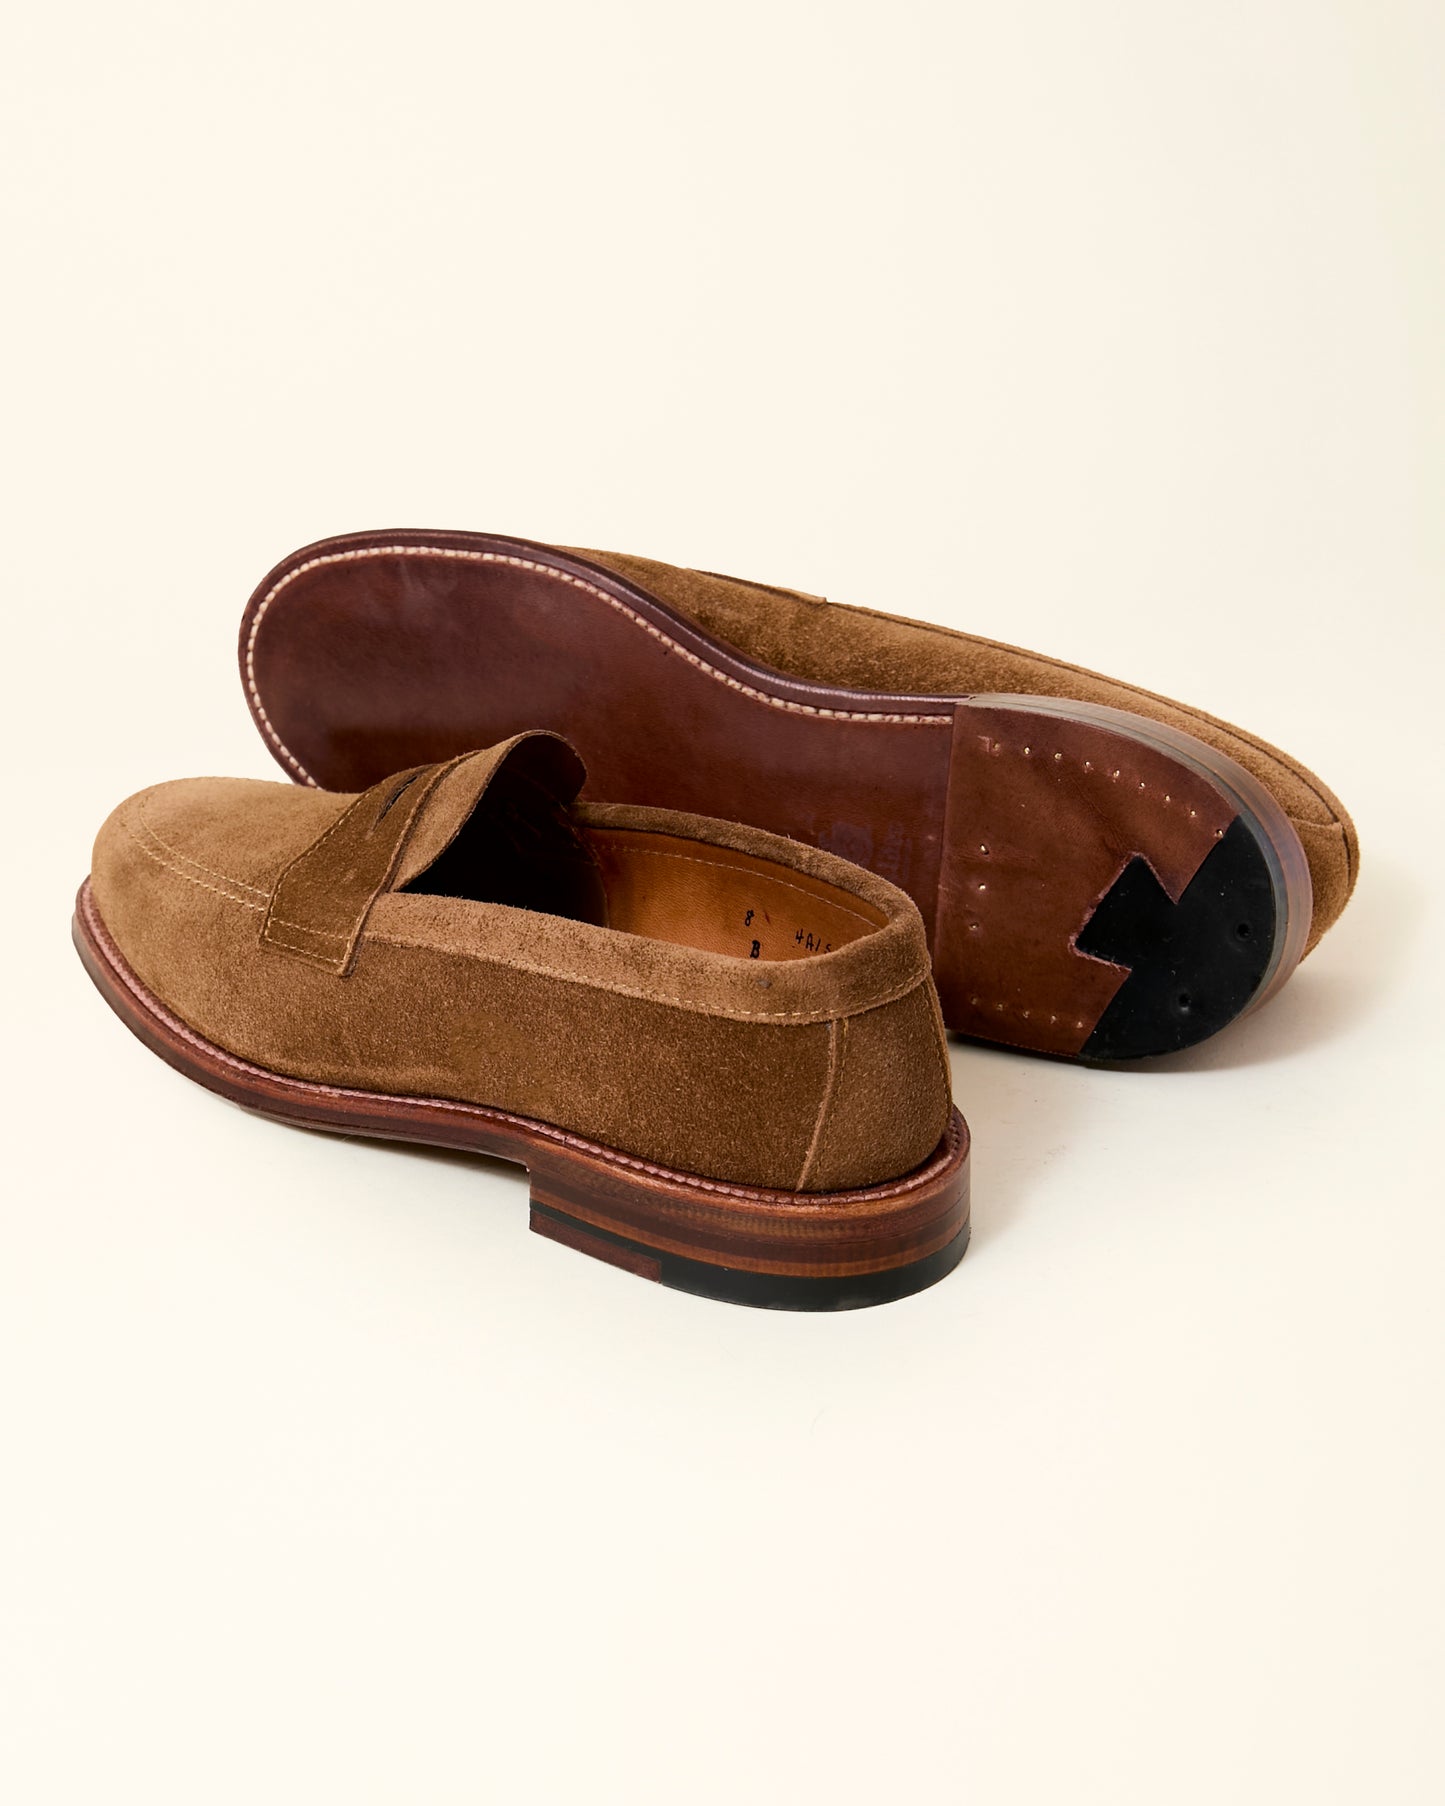 5735F Unlined Penny Loafer in Snuff Suede, Van Last